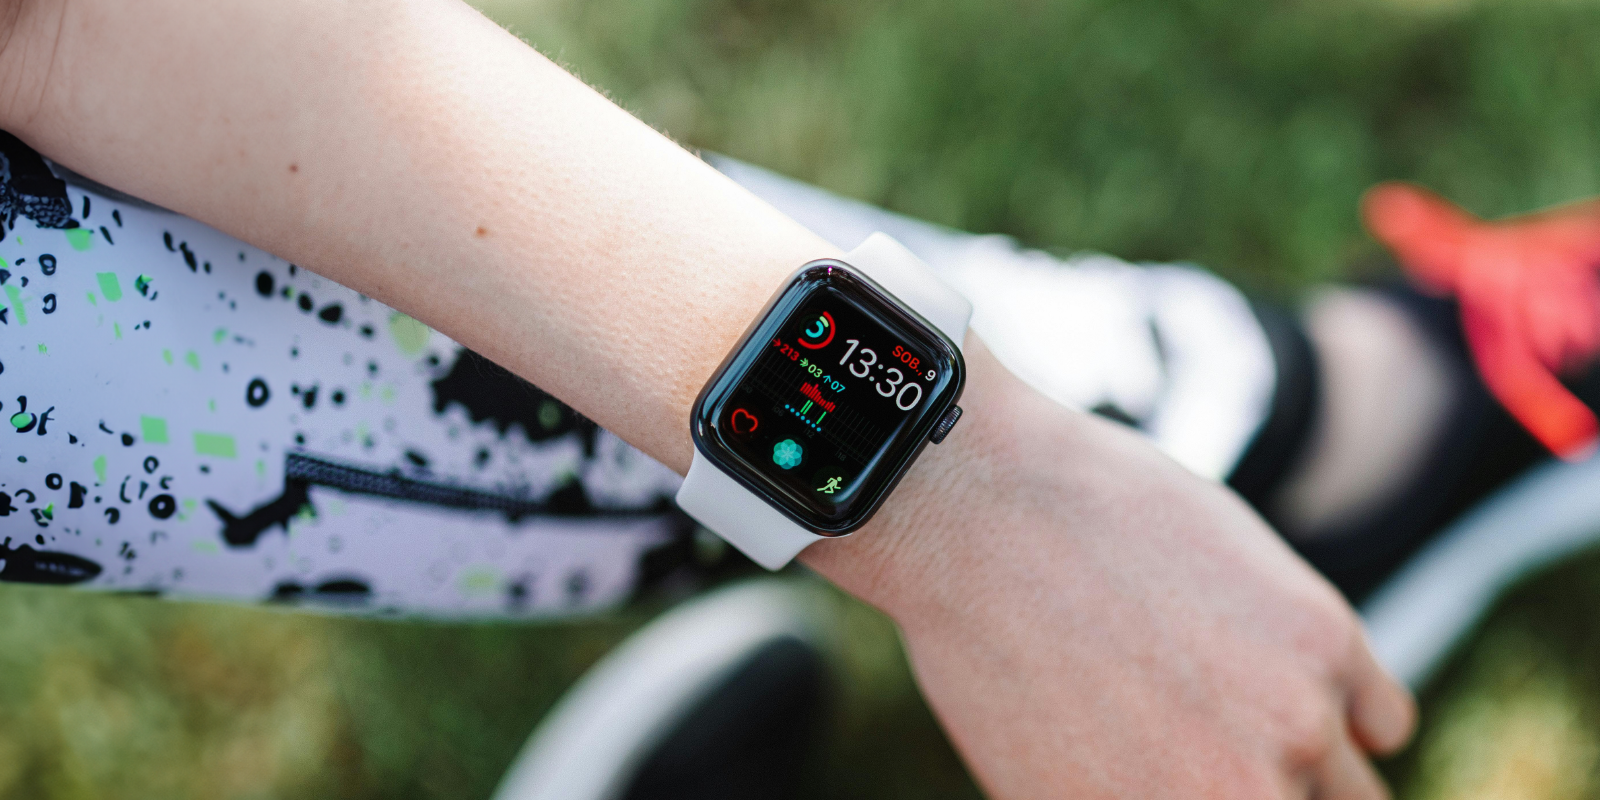 Using Smartwatches in Injury Cases